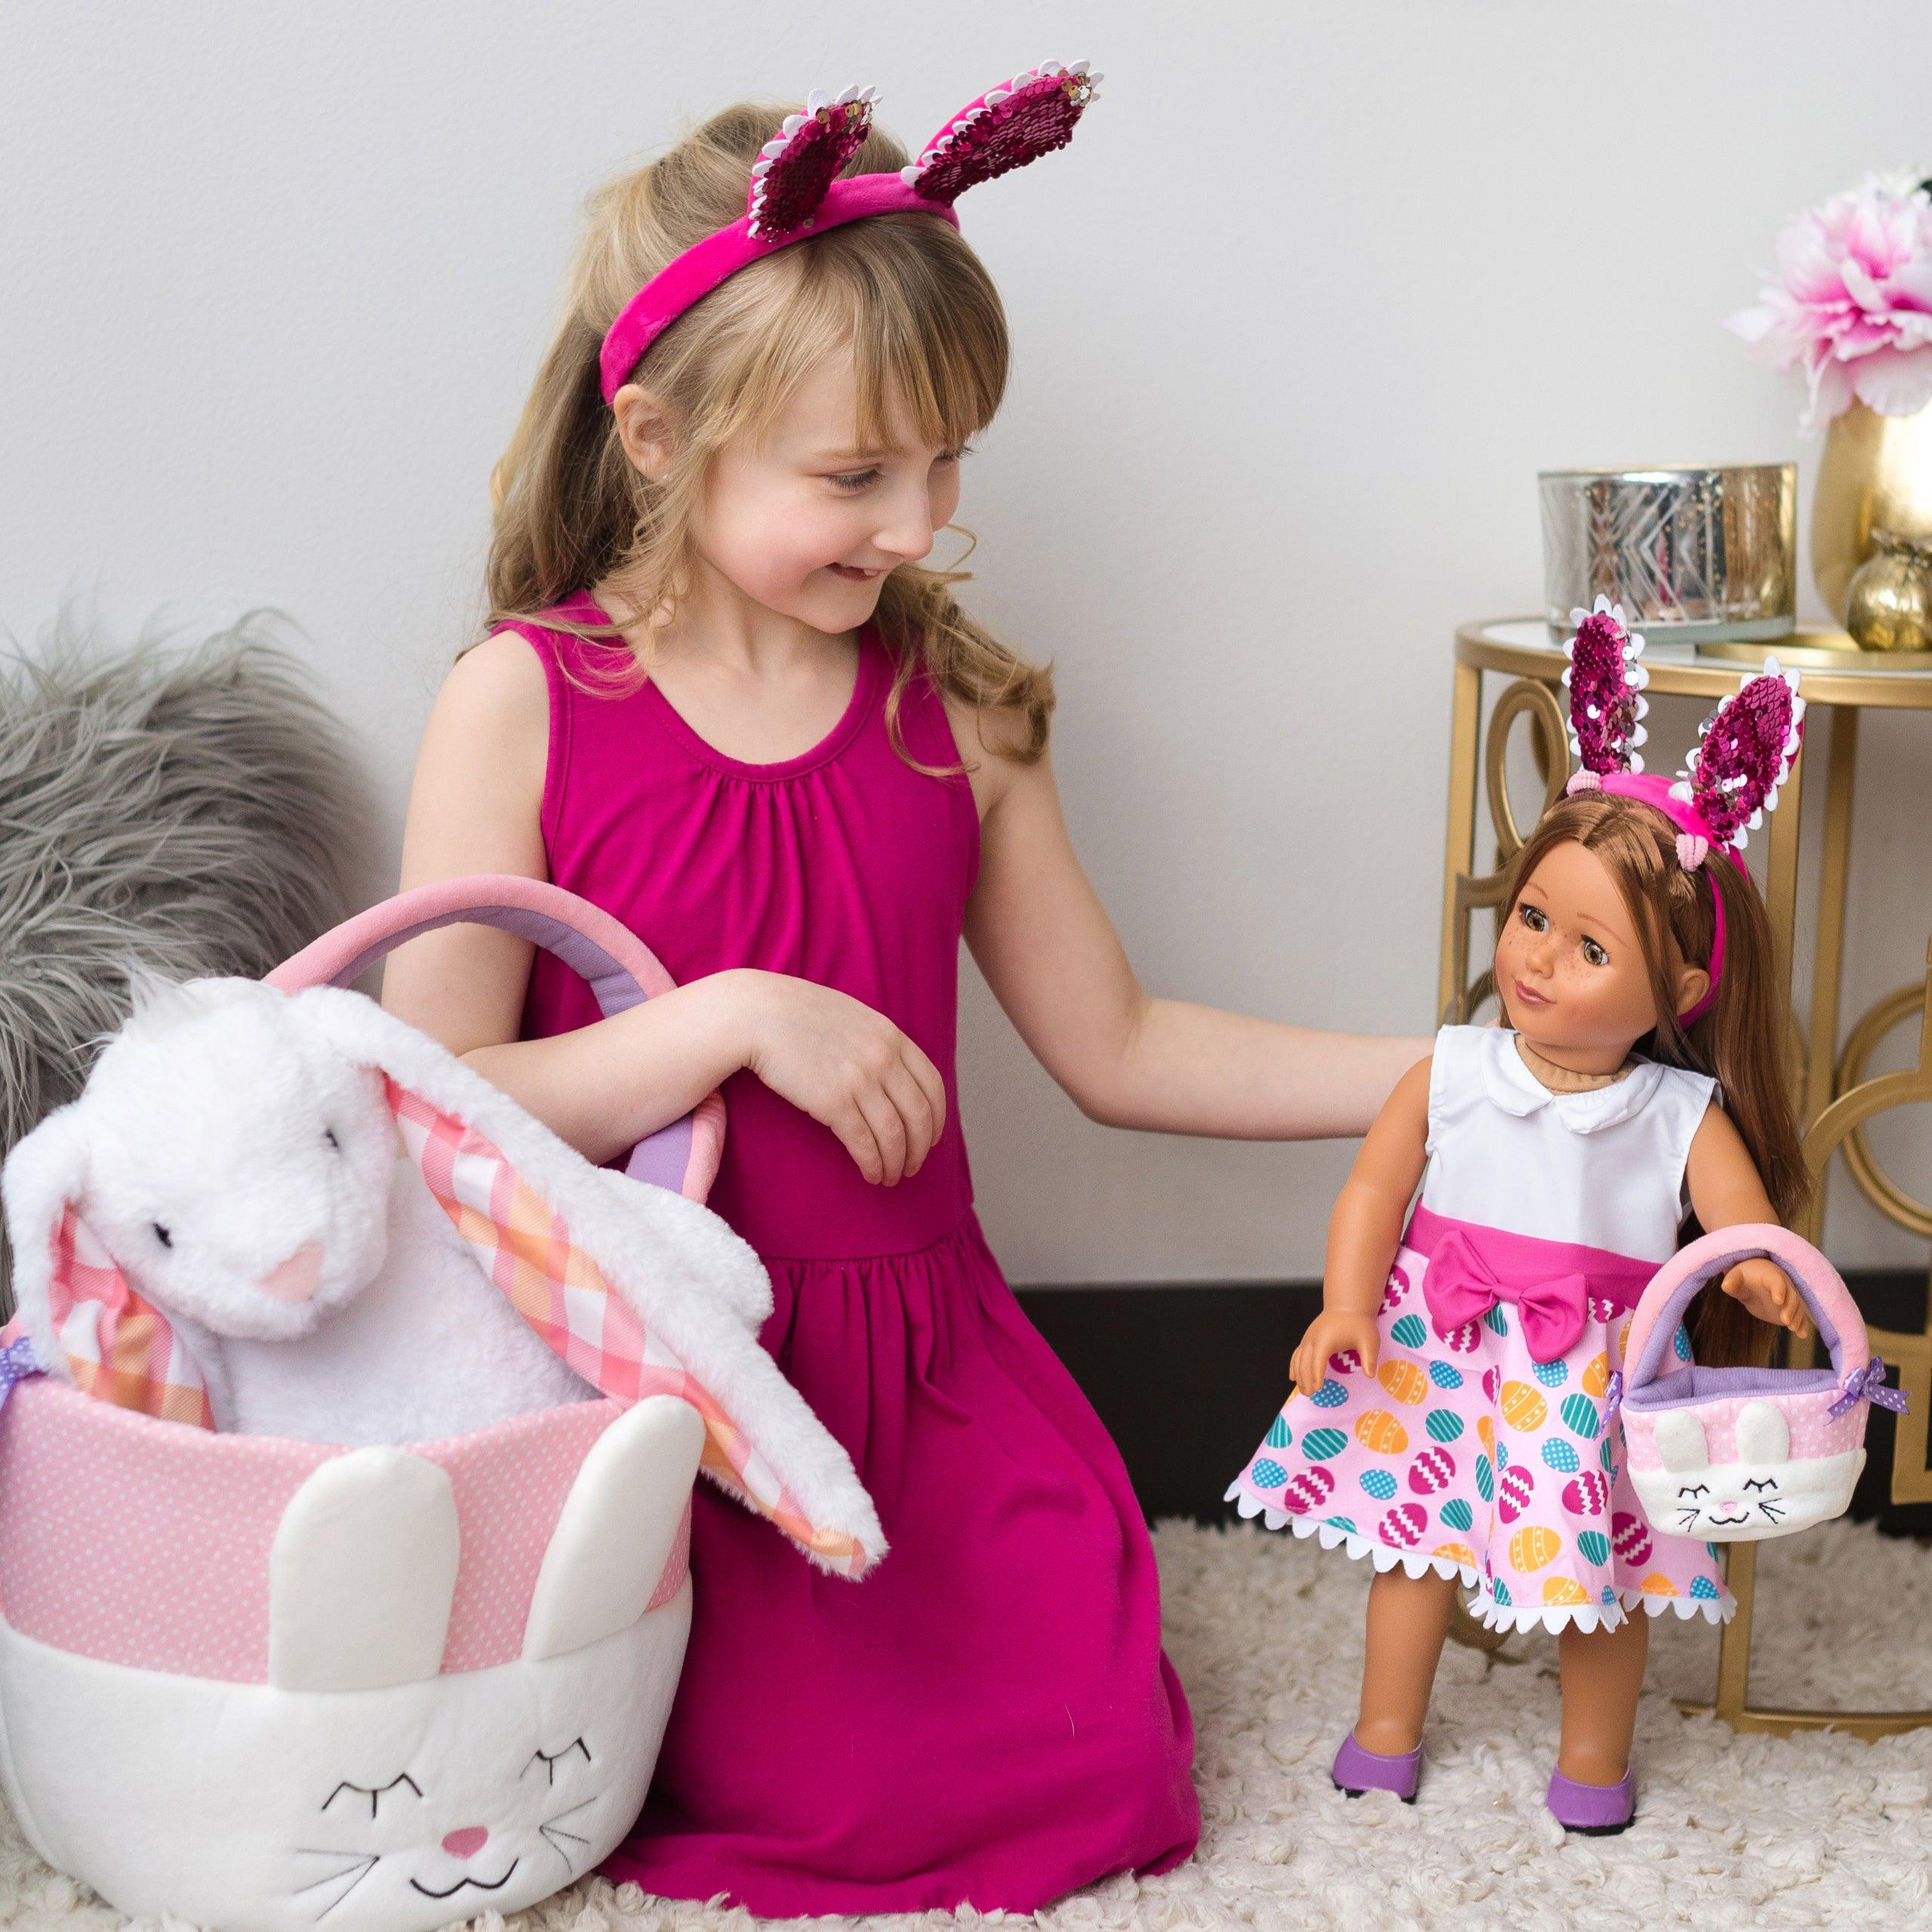 Playtime by Eimmie Playtime Pack Easter with Matching Child Accessories 18 Inch Dolls - OrangeOnions Wholesale